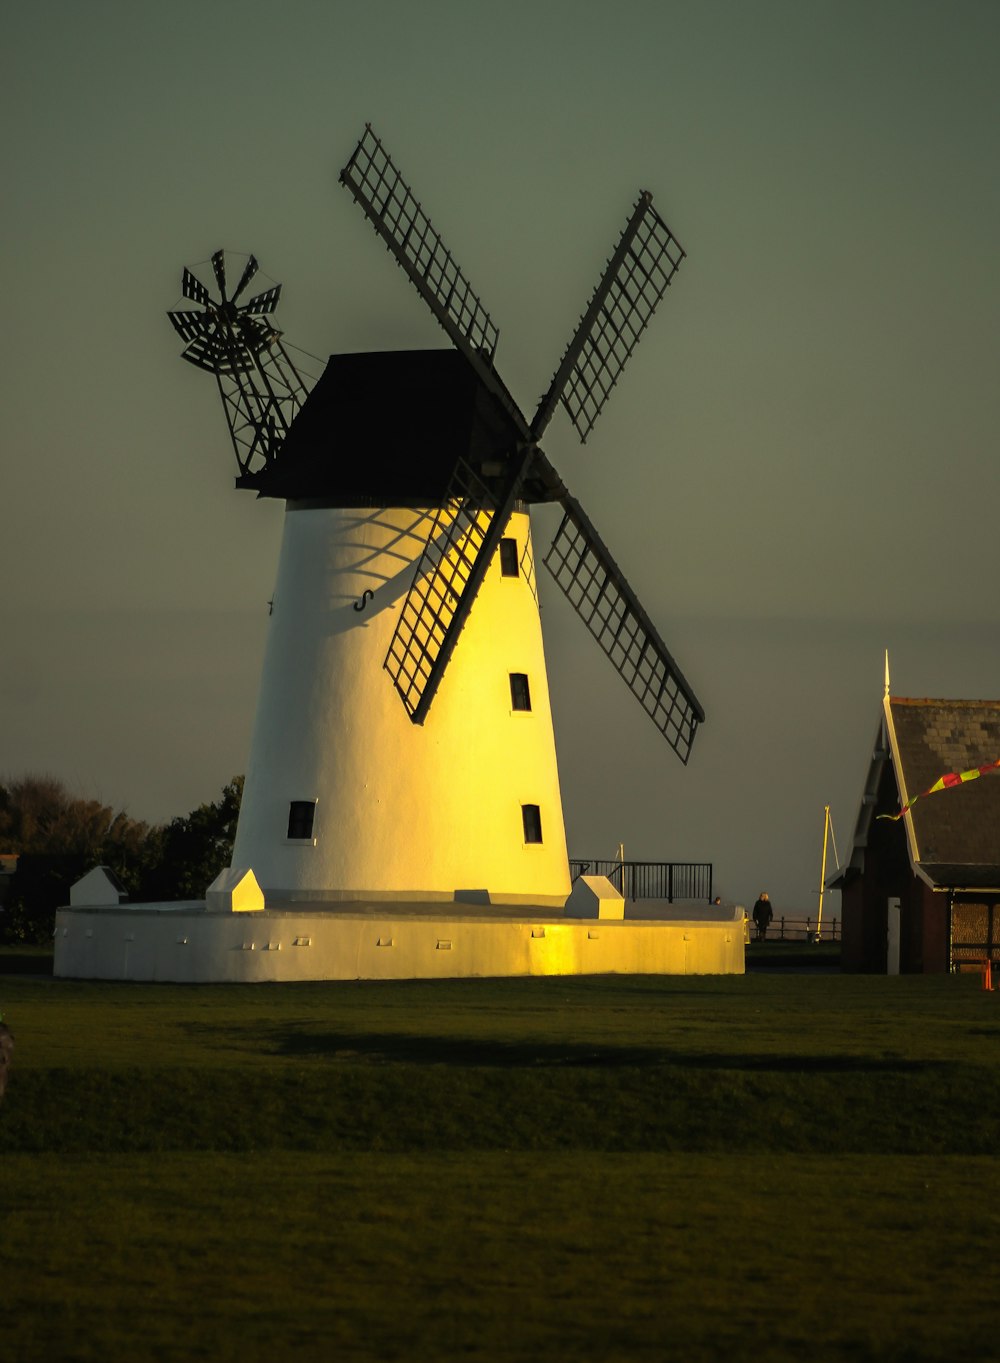 a windmill sitting in a field next to a building